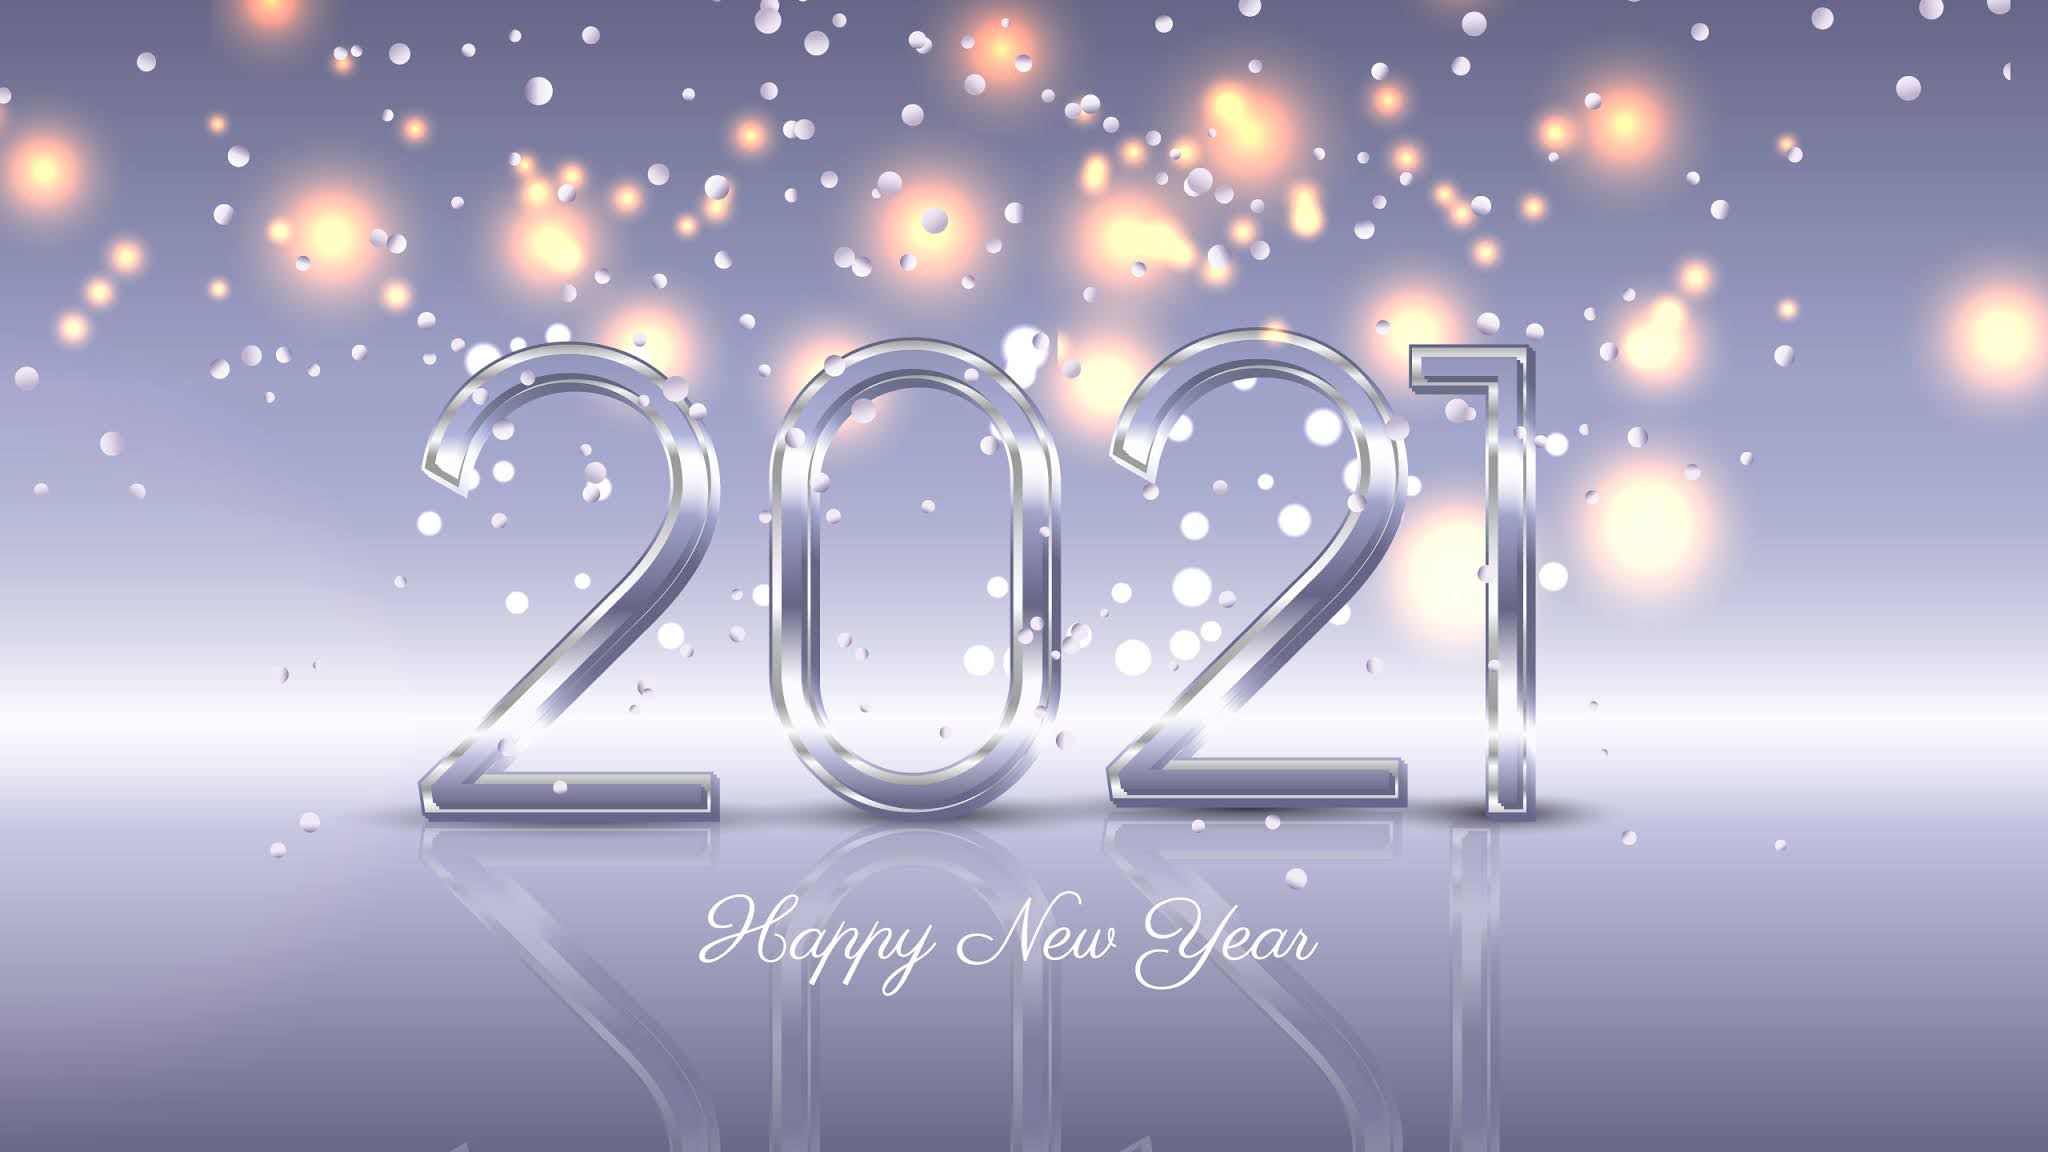 New Year 2021 HD Wallpapers - Wallpaper Cave